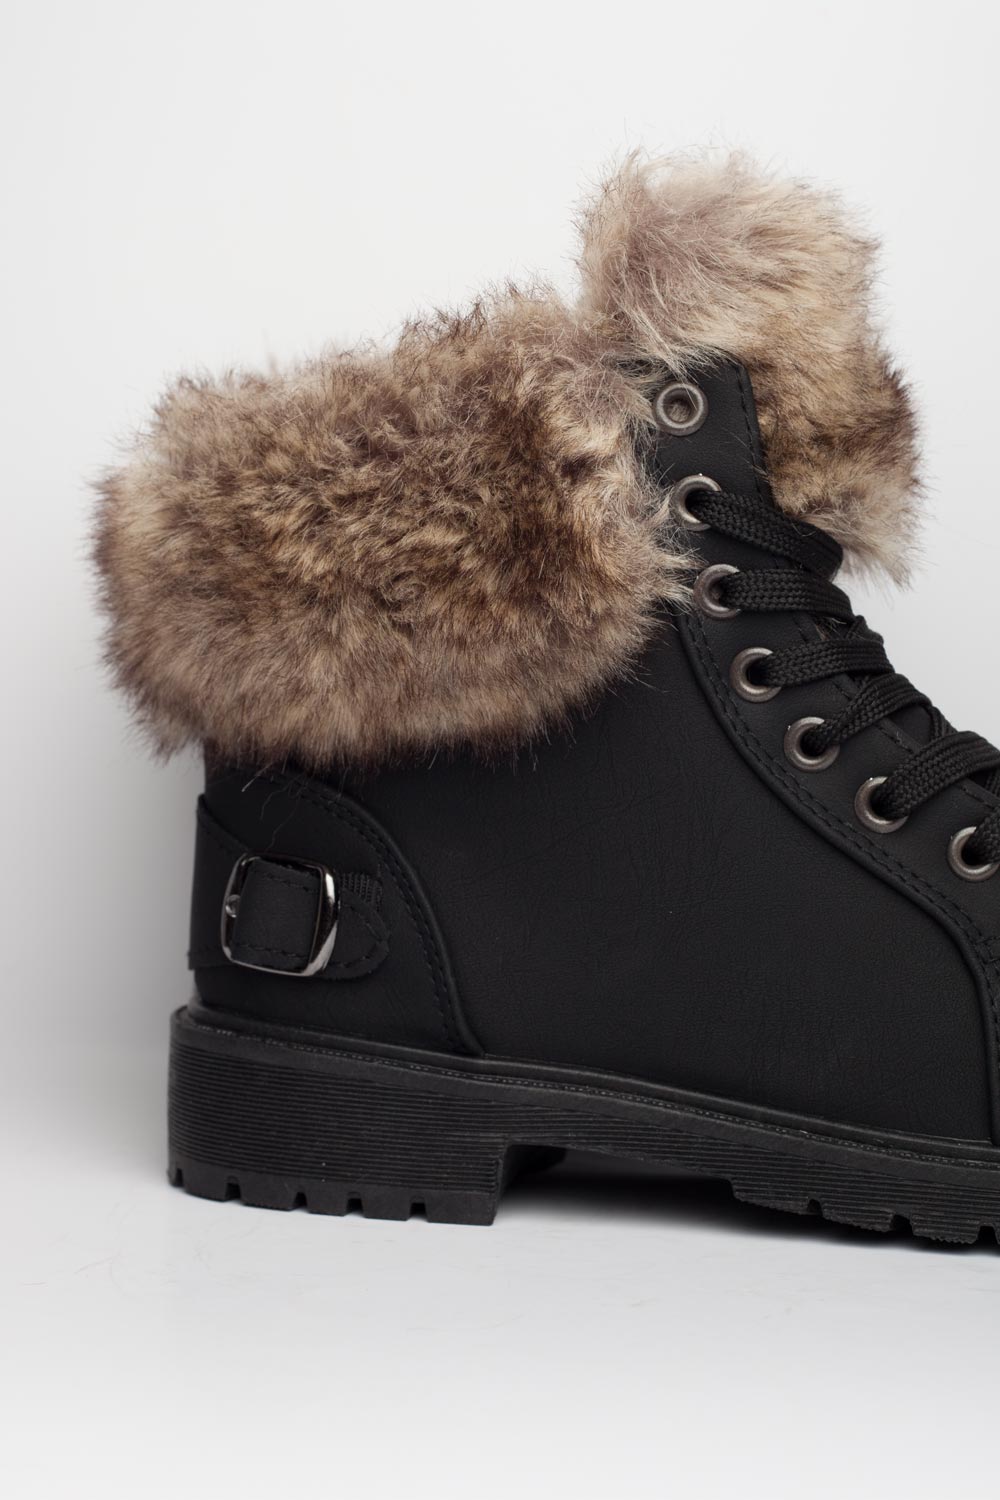 fur ankle boots uk